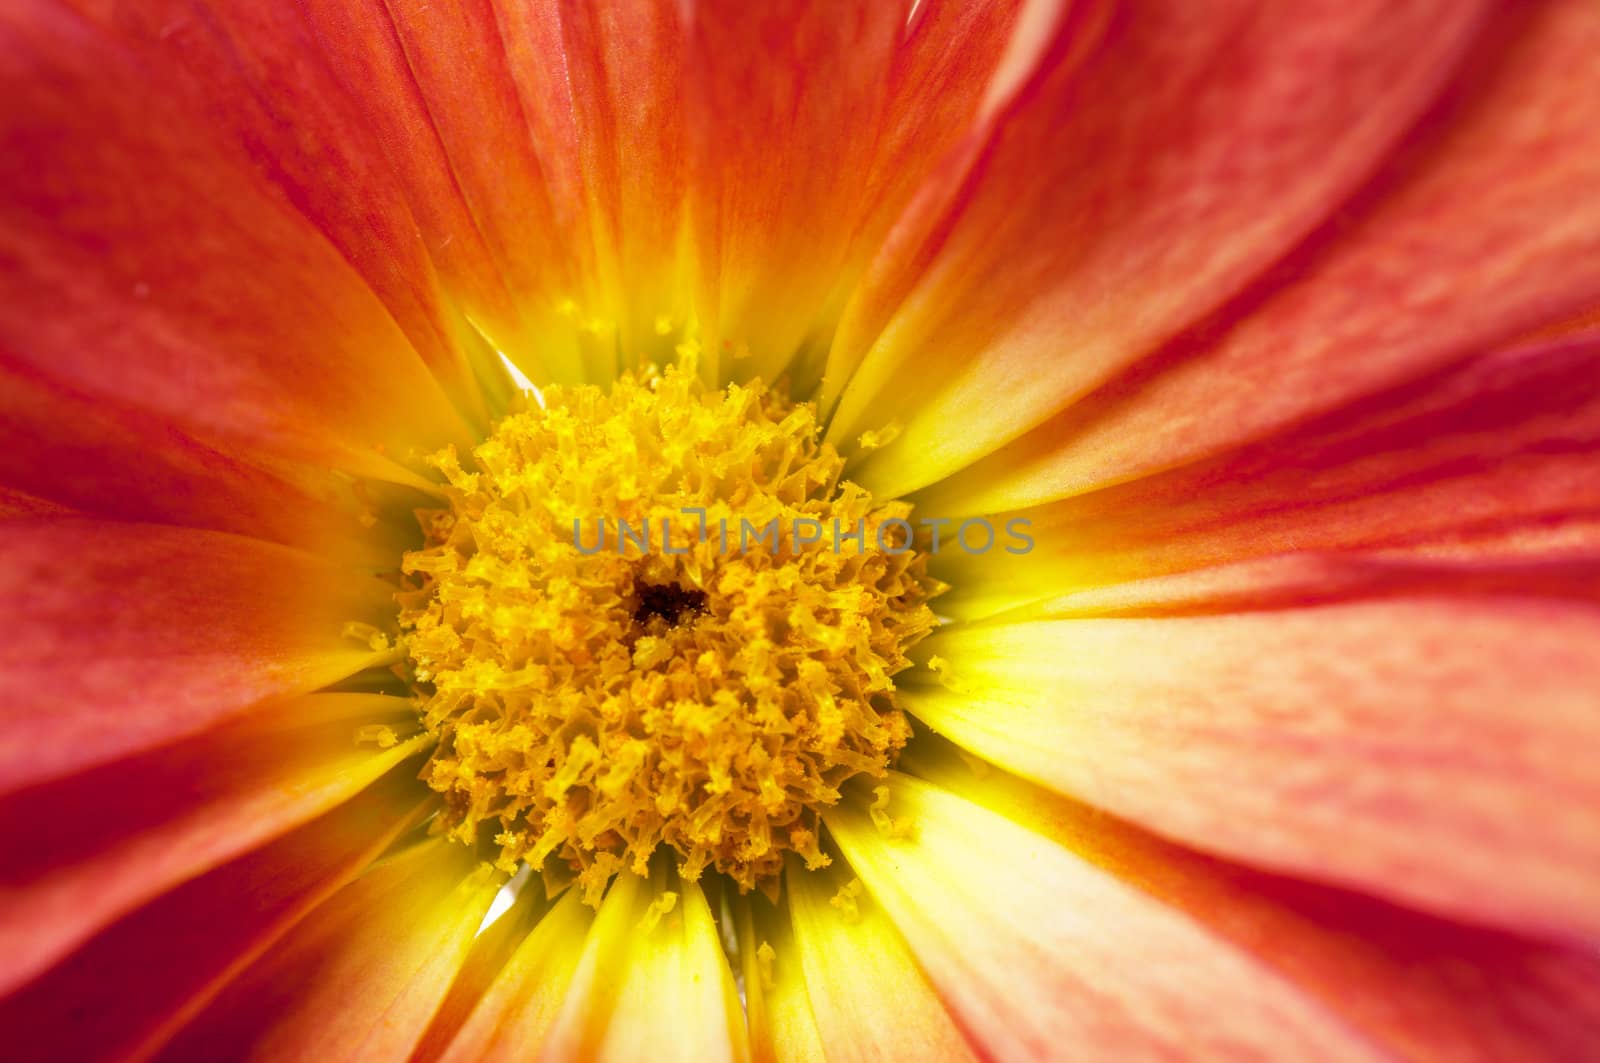 Macro view of daisy red petals
